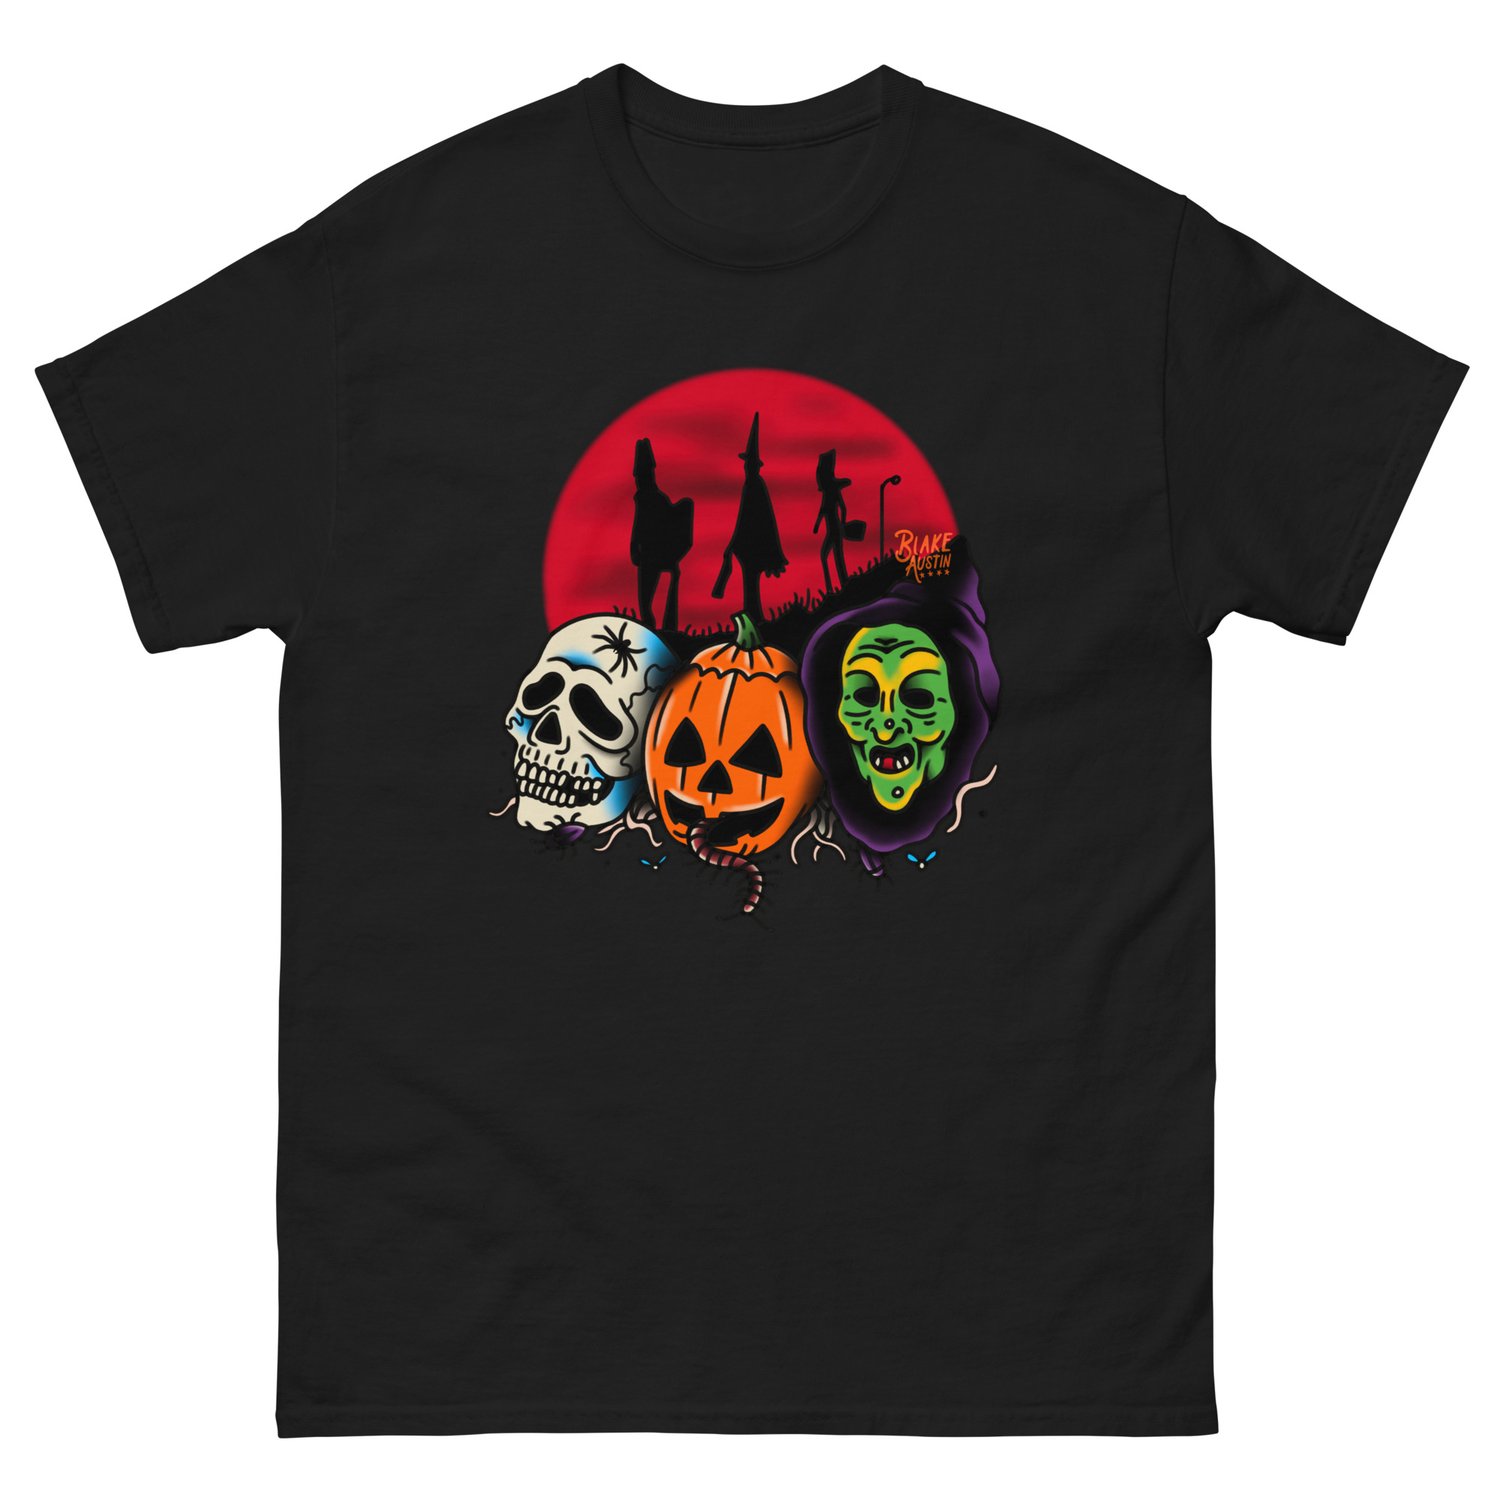 Image of Season of the Witch tee